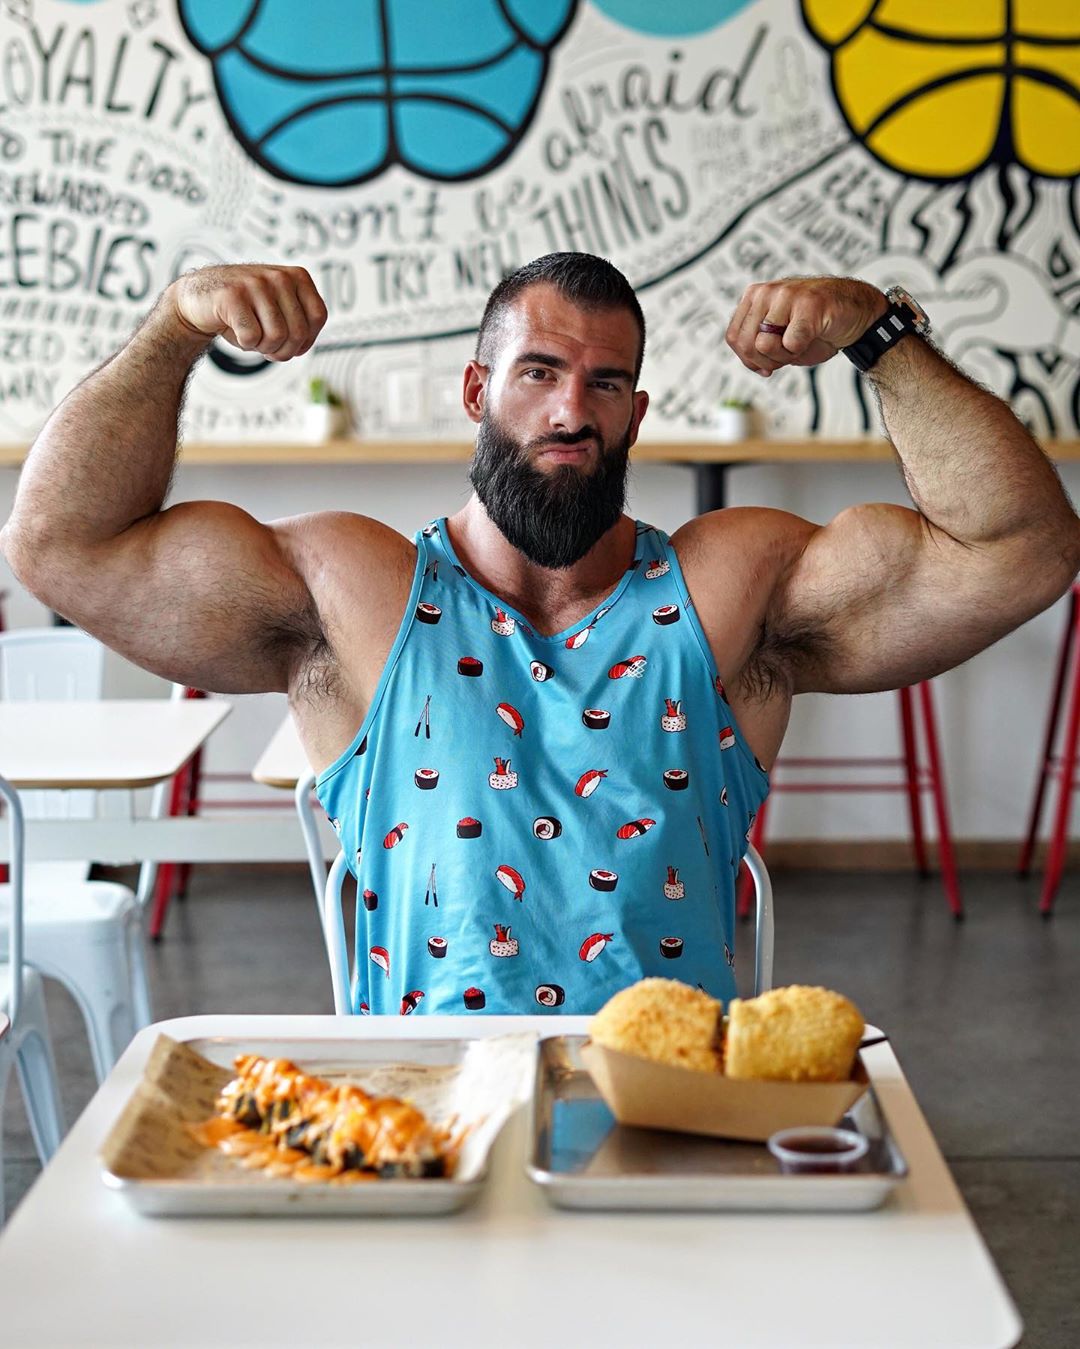 As you have maybe noticed, Nick Pulos with his impressive size is the most ...